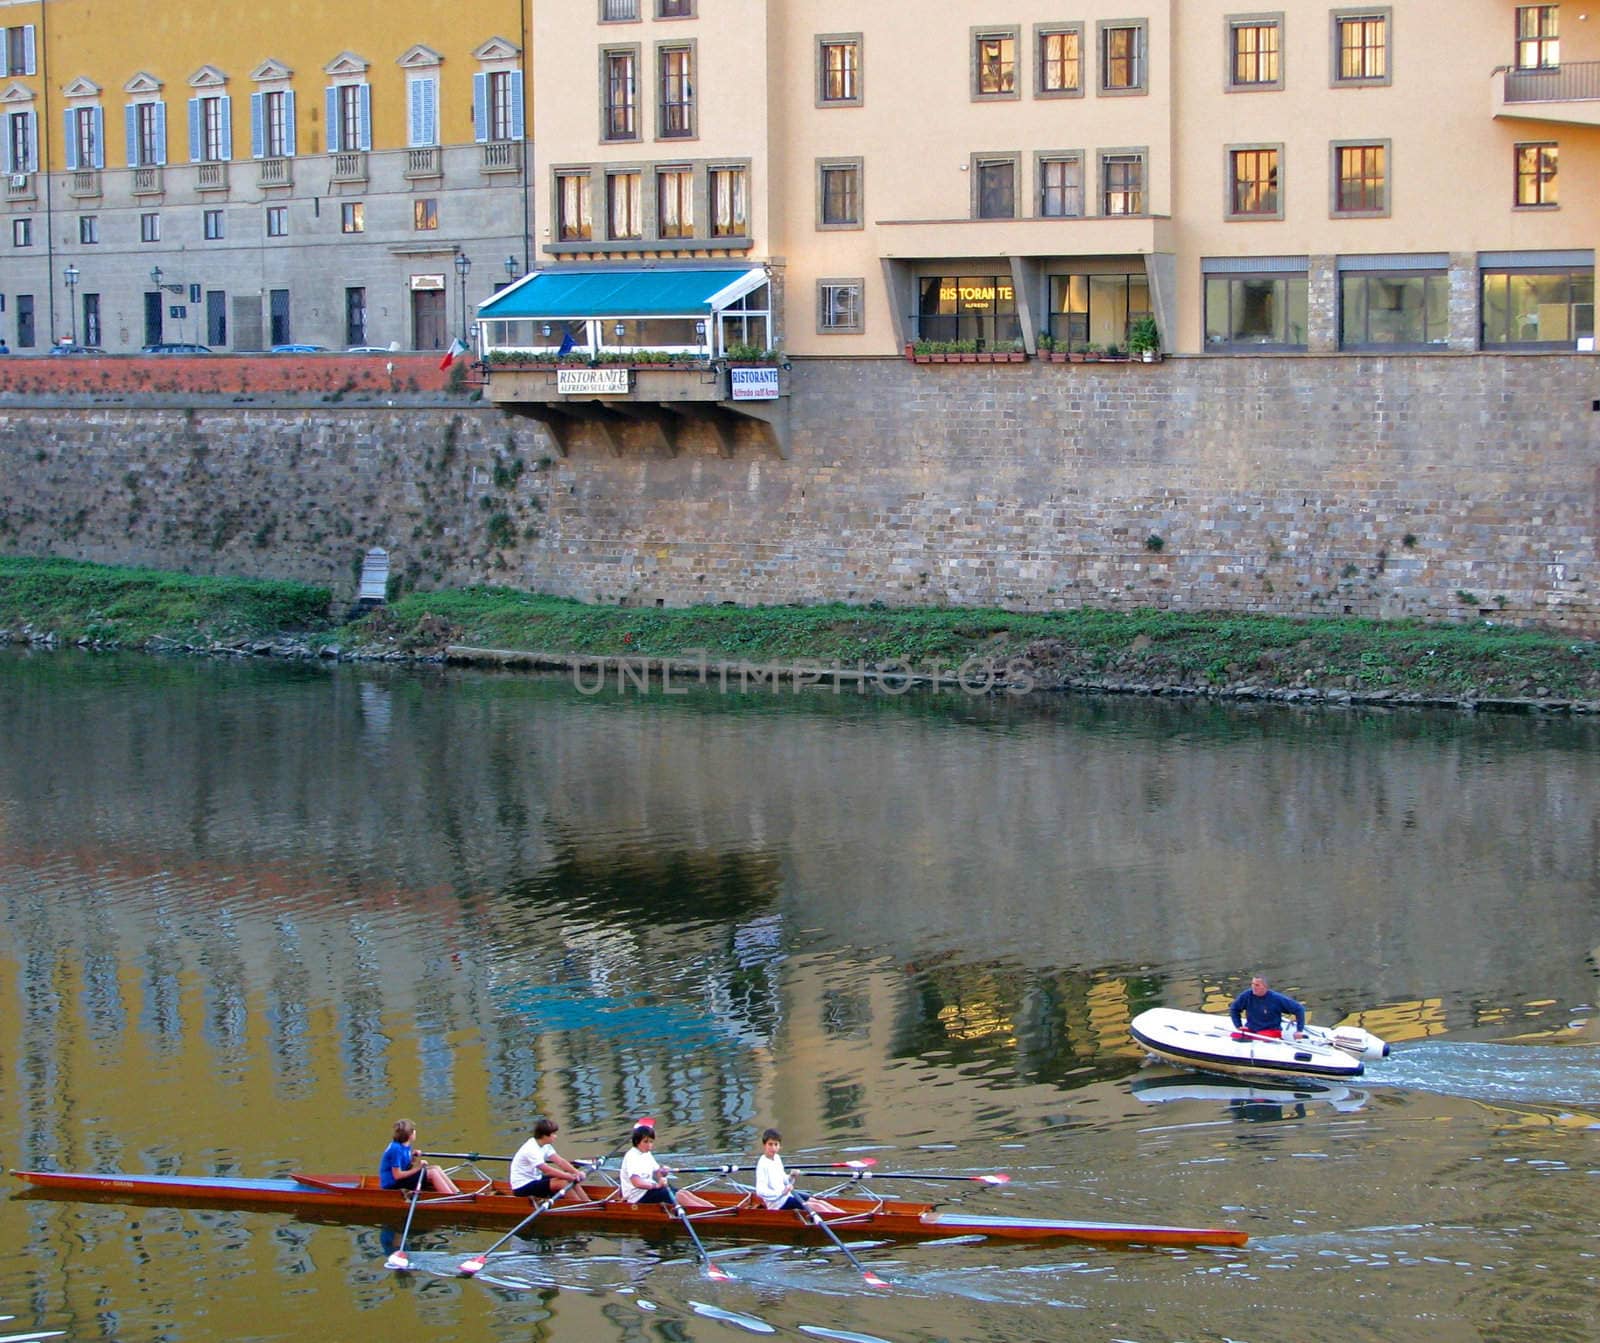 Rowing Team Practice in Florence, Italy by bellafotosolo